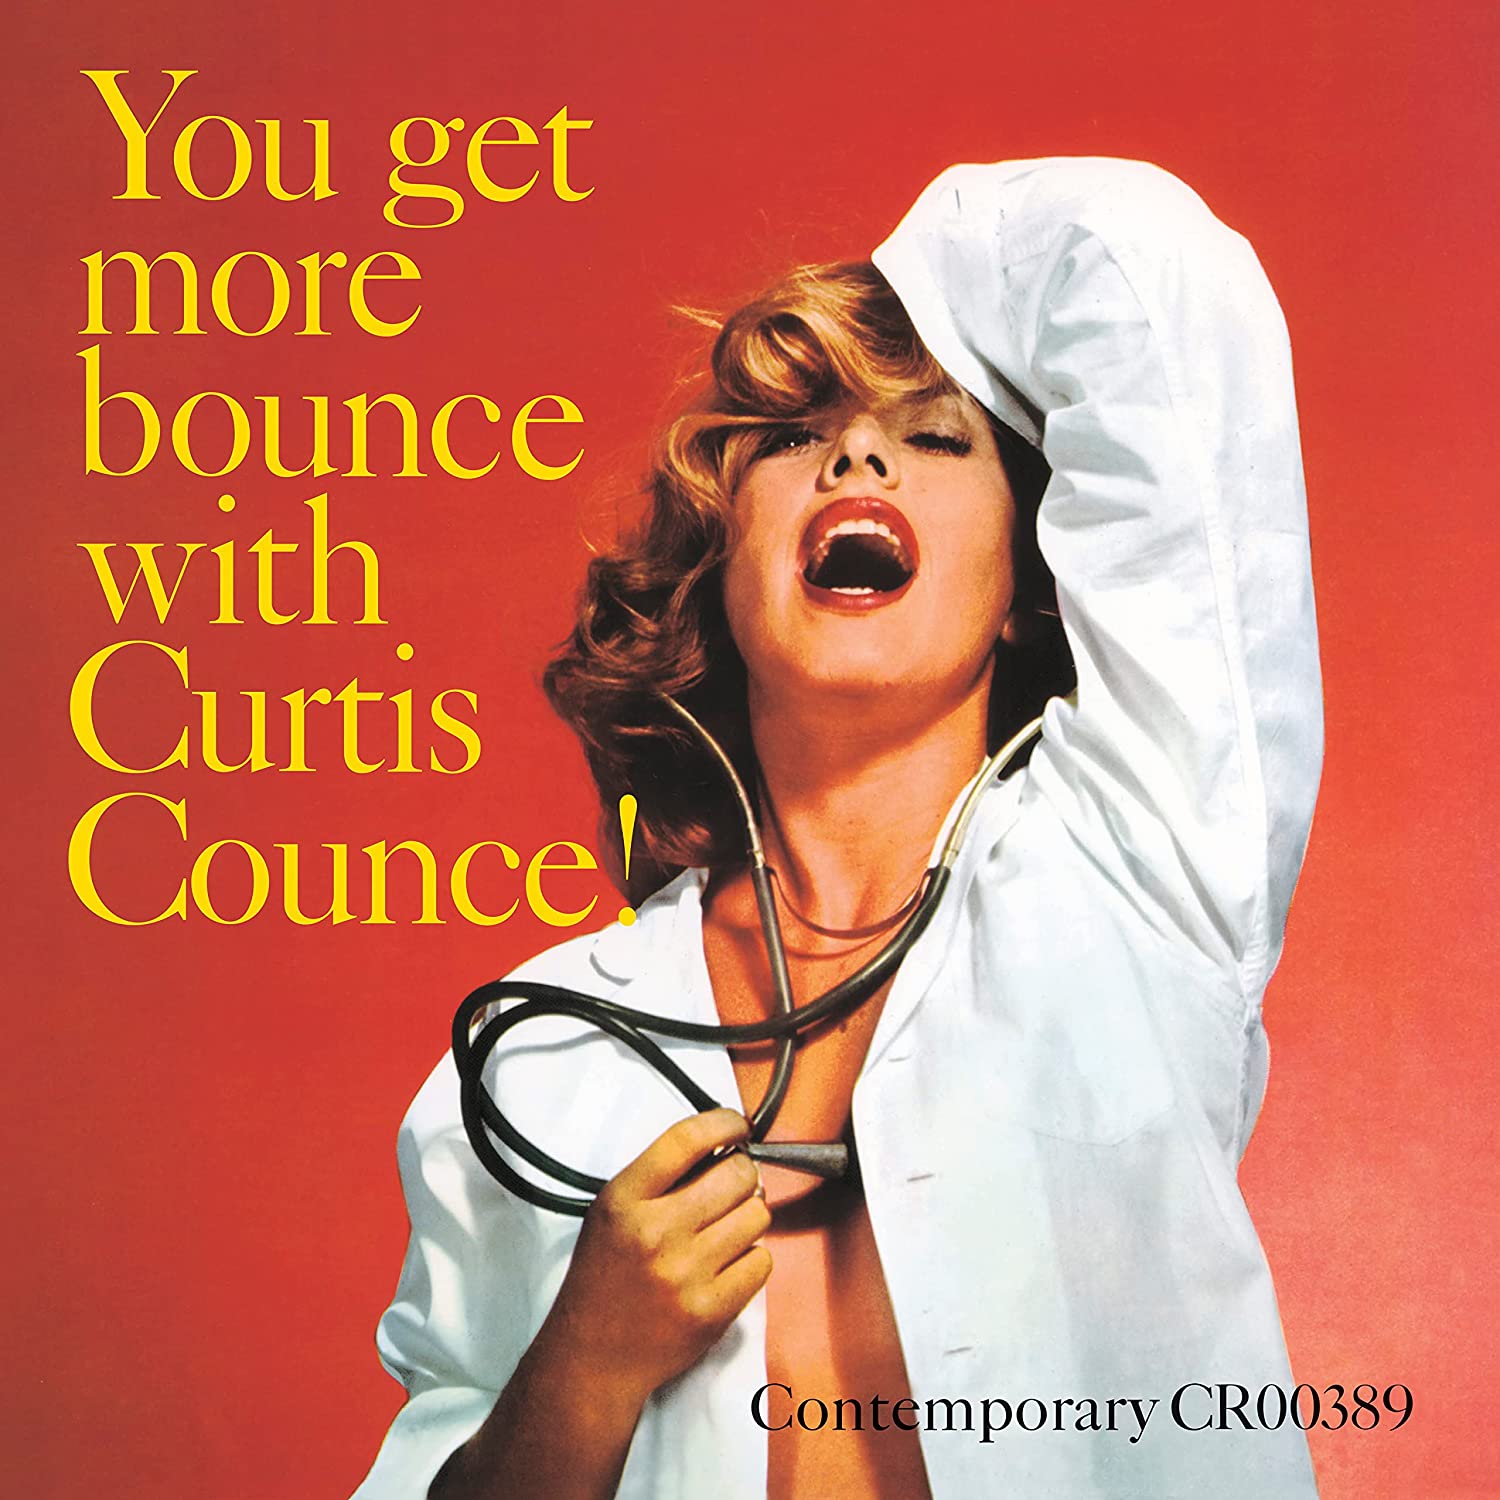 Джаз Universal US Curtis Counce - You Get More Bounce With Curtis Counce (Acoustic Sound) (Black Vinyl LP)